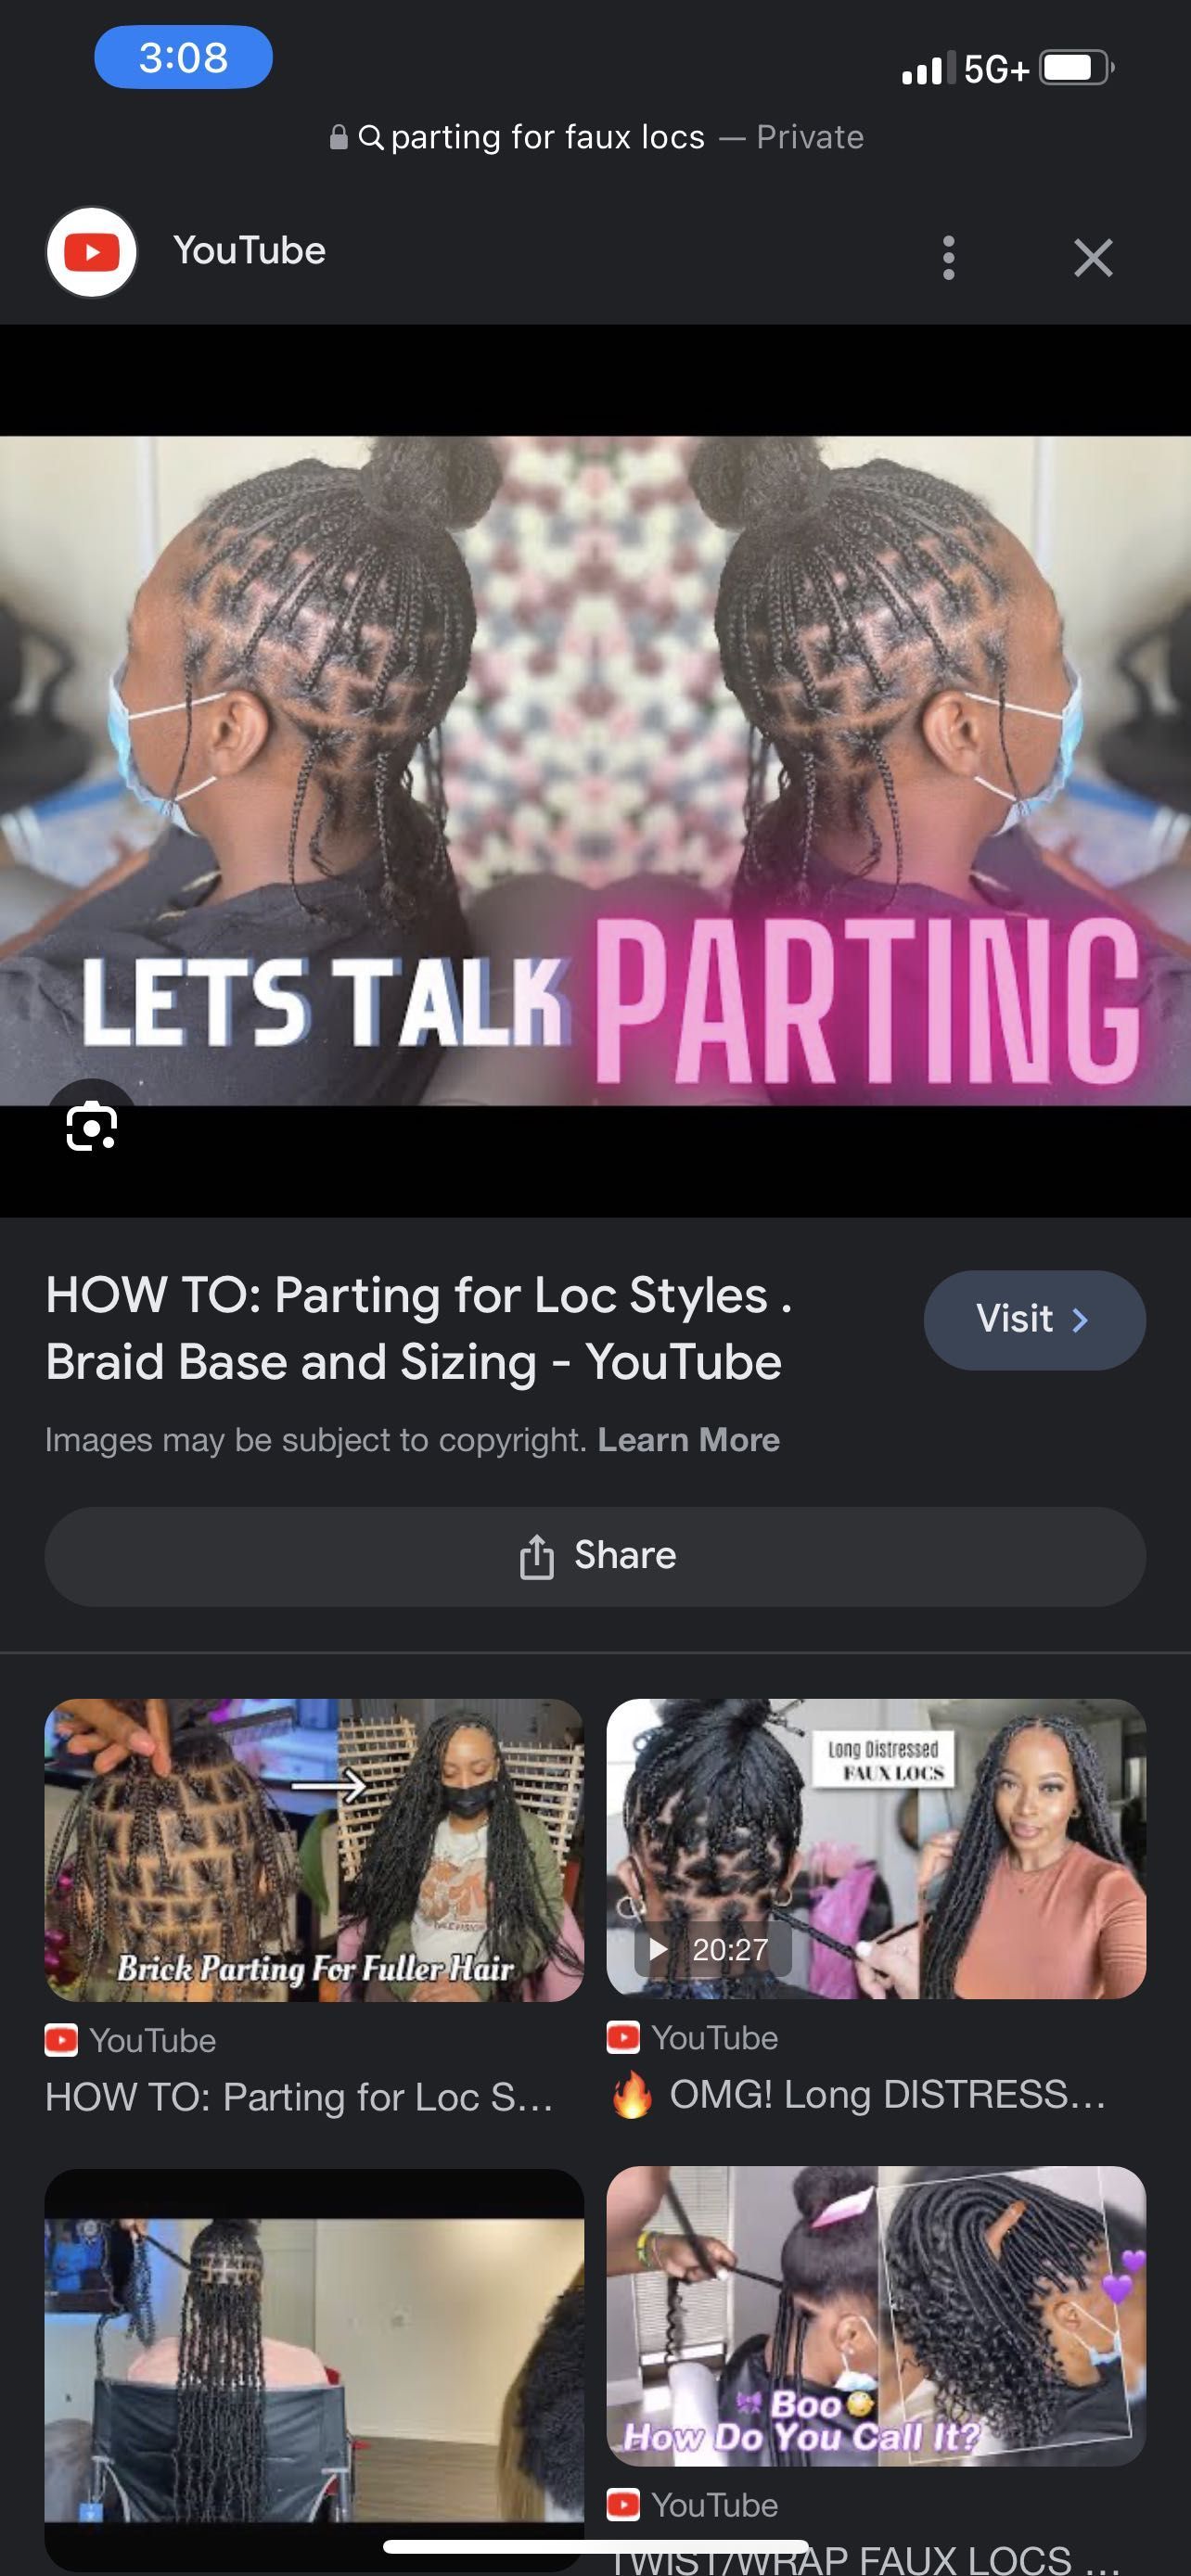 Pre-parting for your protective styles portfolio